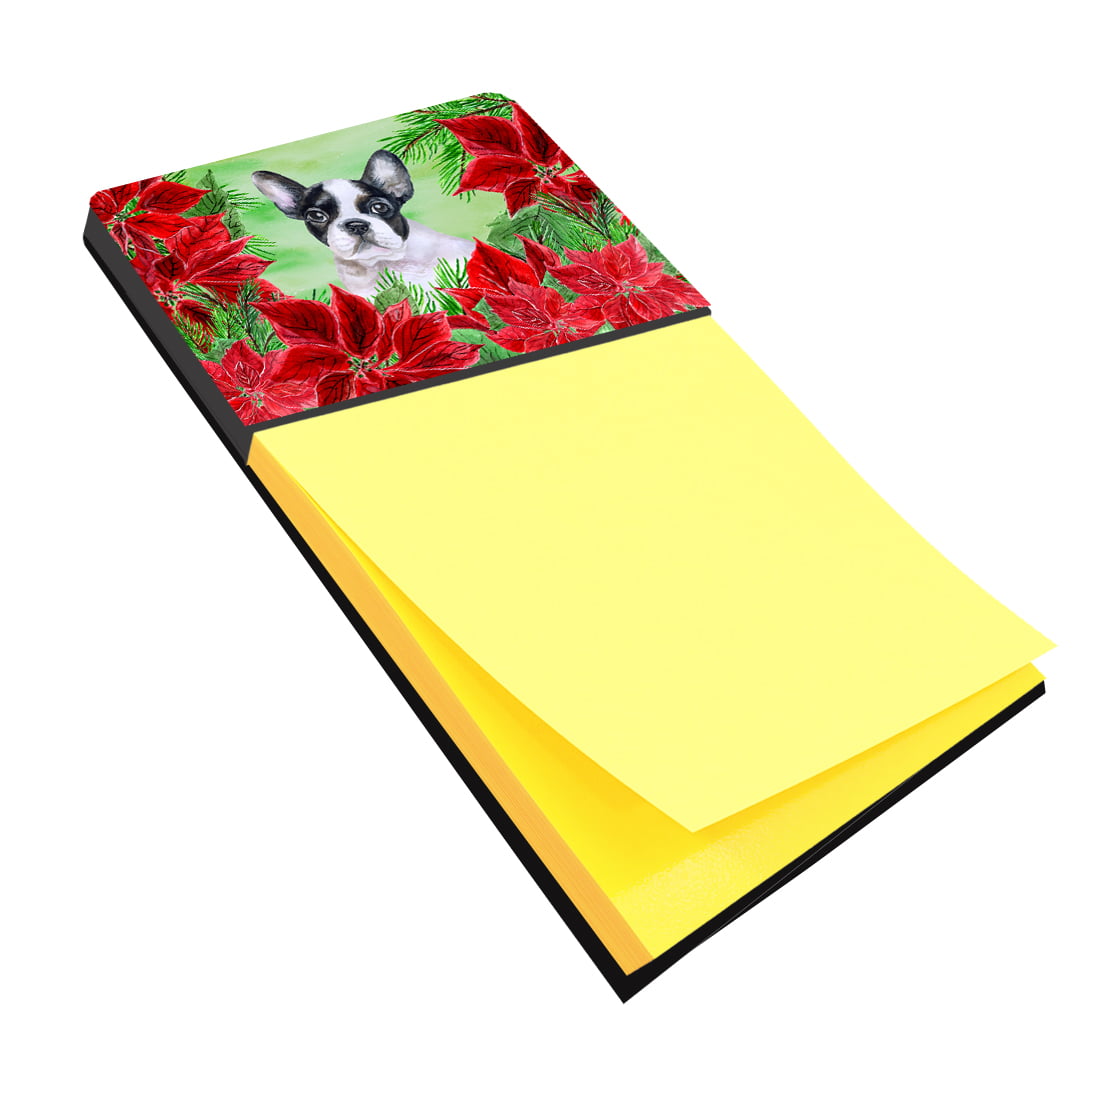 Picture of Carolines Treasures CK1358SN French Bulldog Black White Poinsettas Sticky Note Holder